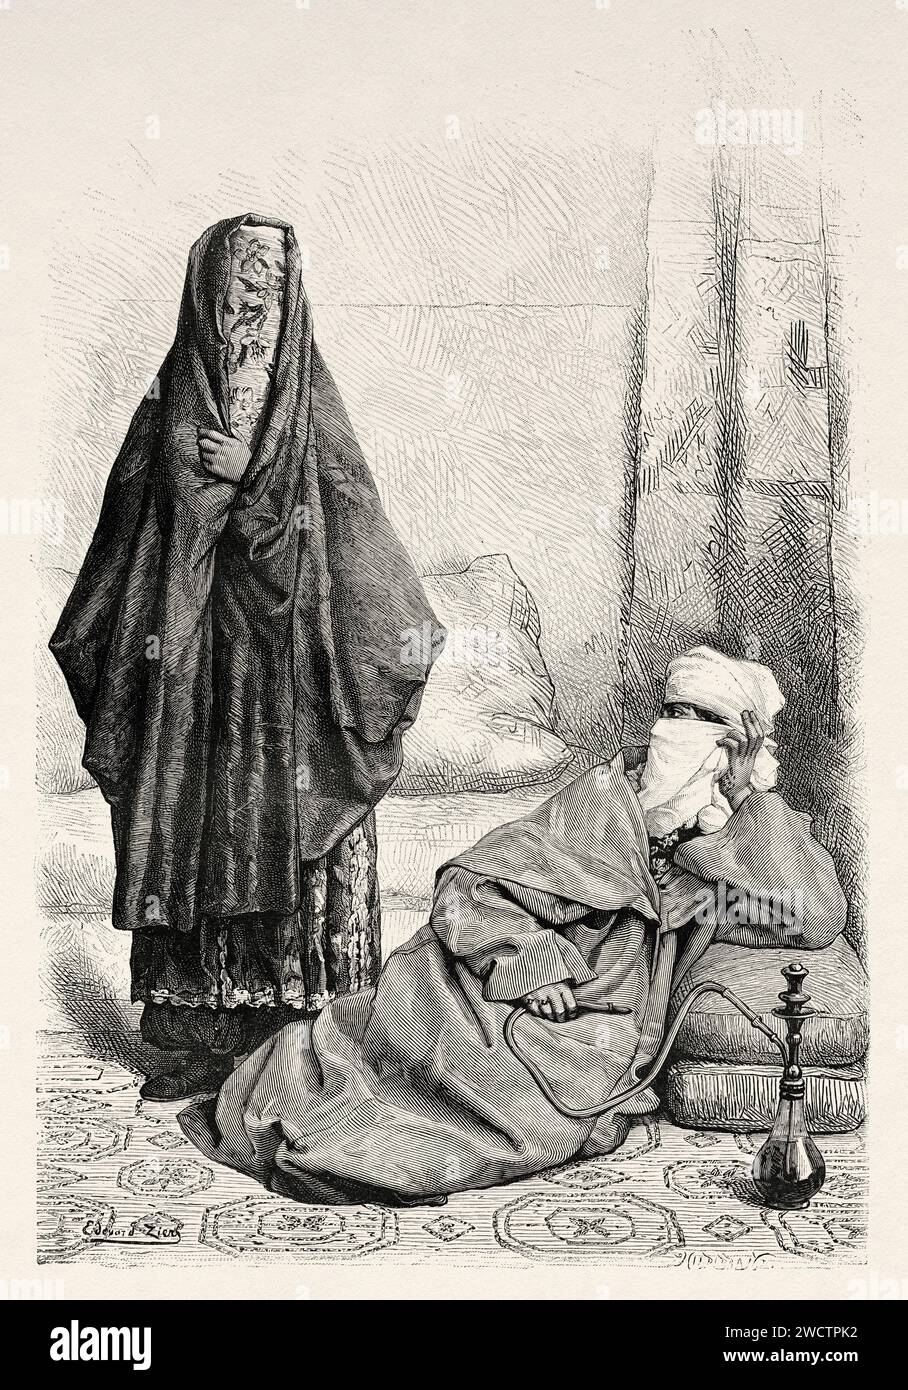 Women dressed in traditional typical clothing in Latakia. Travel to Syria 1875-1878 by Charles Louis Lortet (1836 - 1909) Old 19th century engraving from Le Tour du Monde 1880 Stock Photo